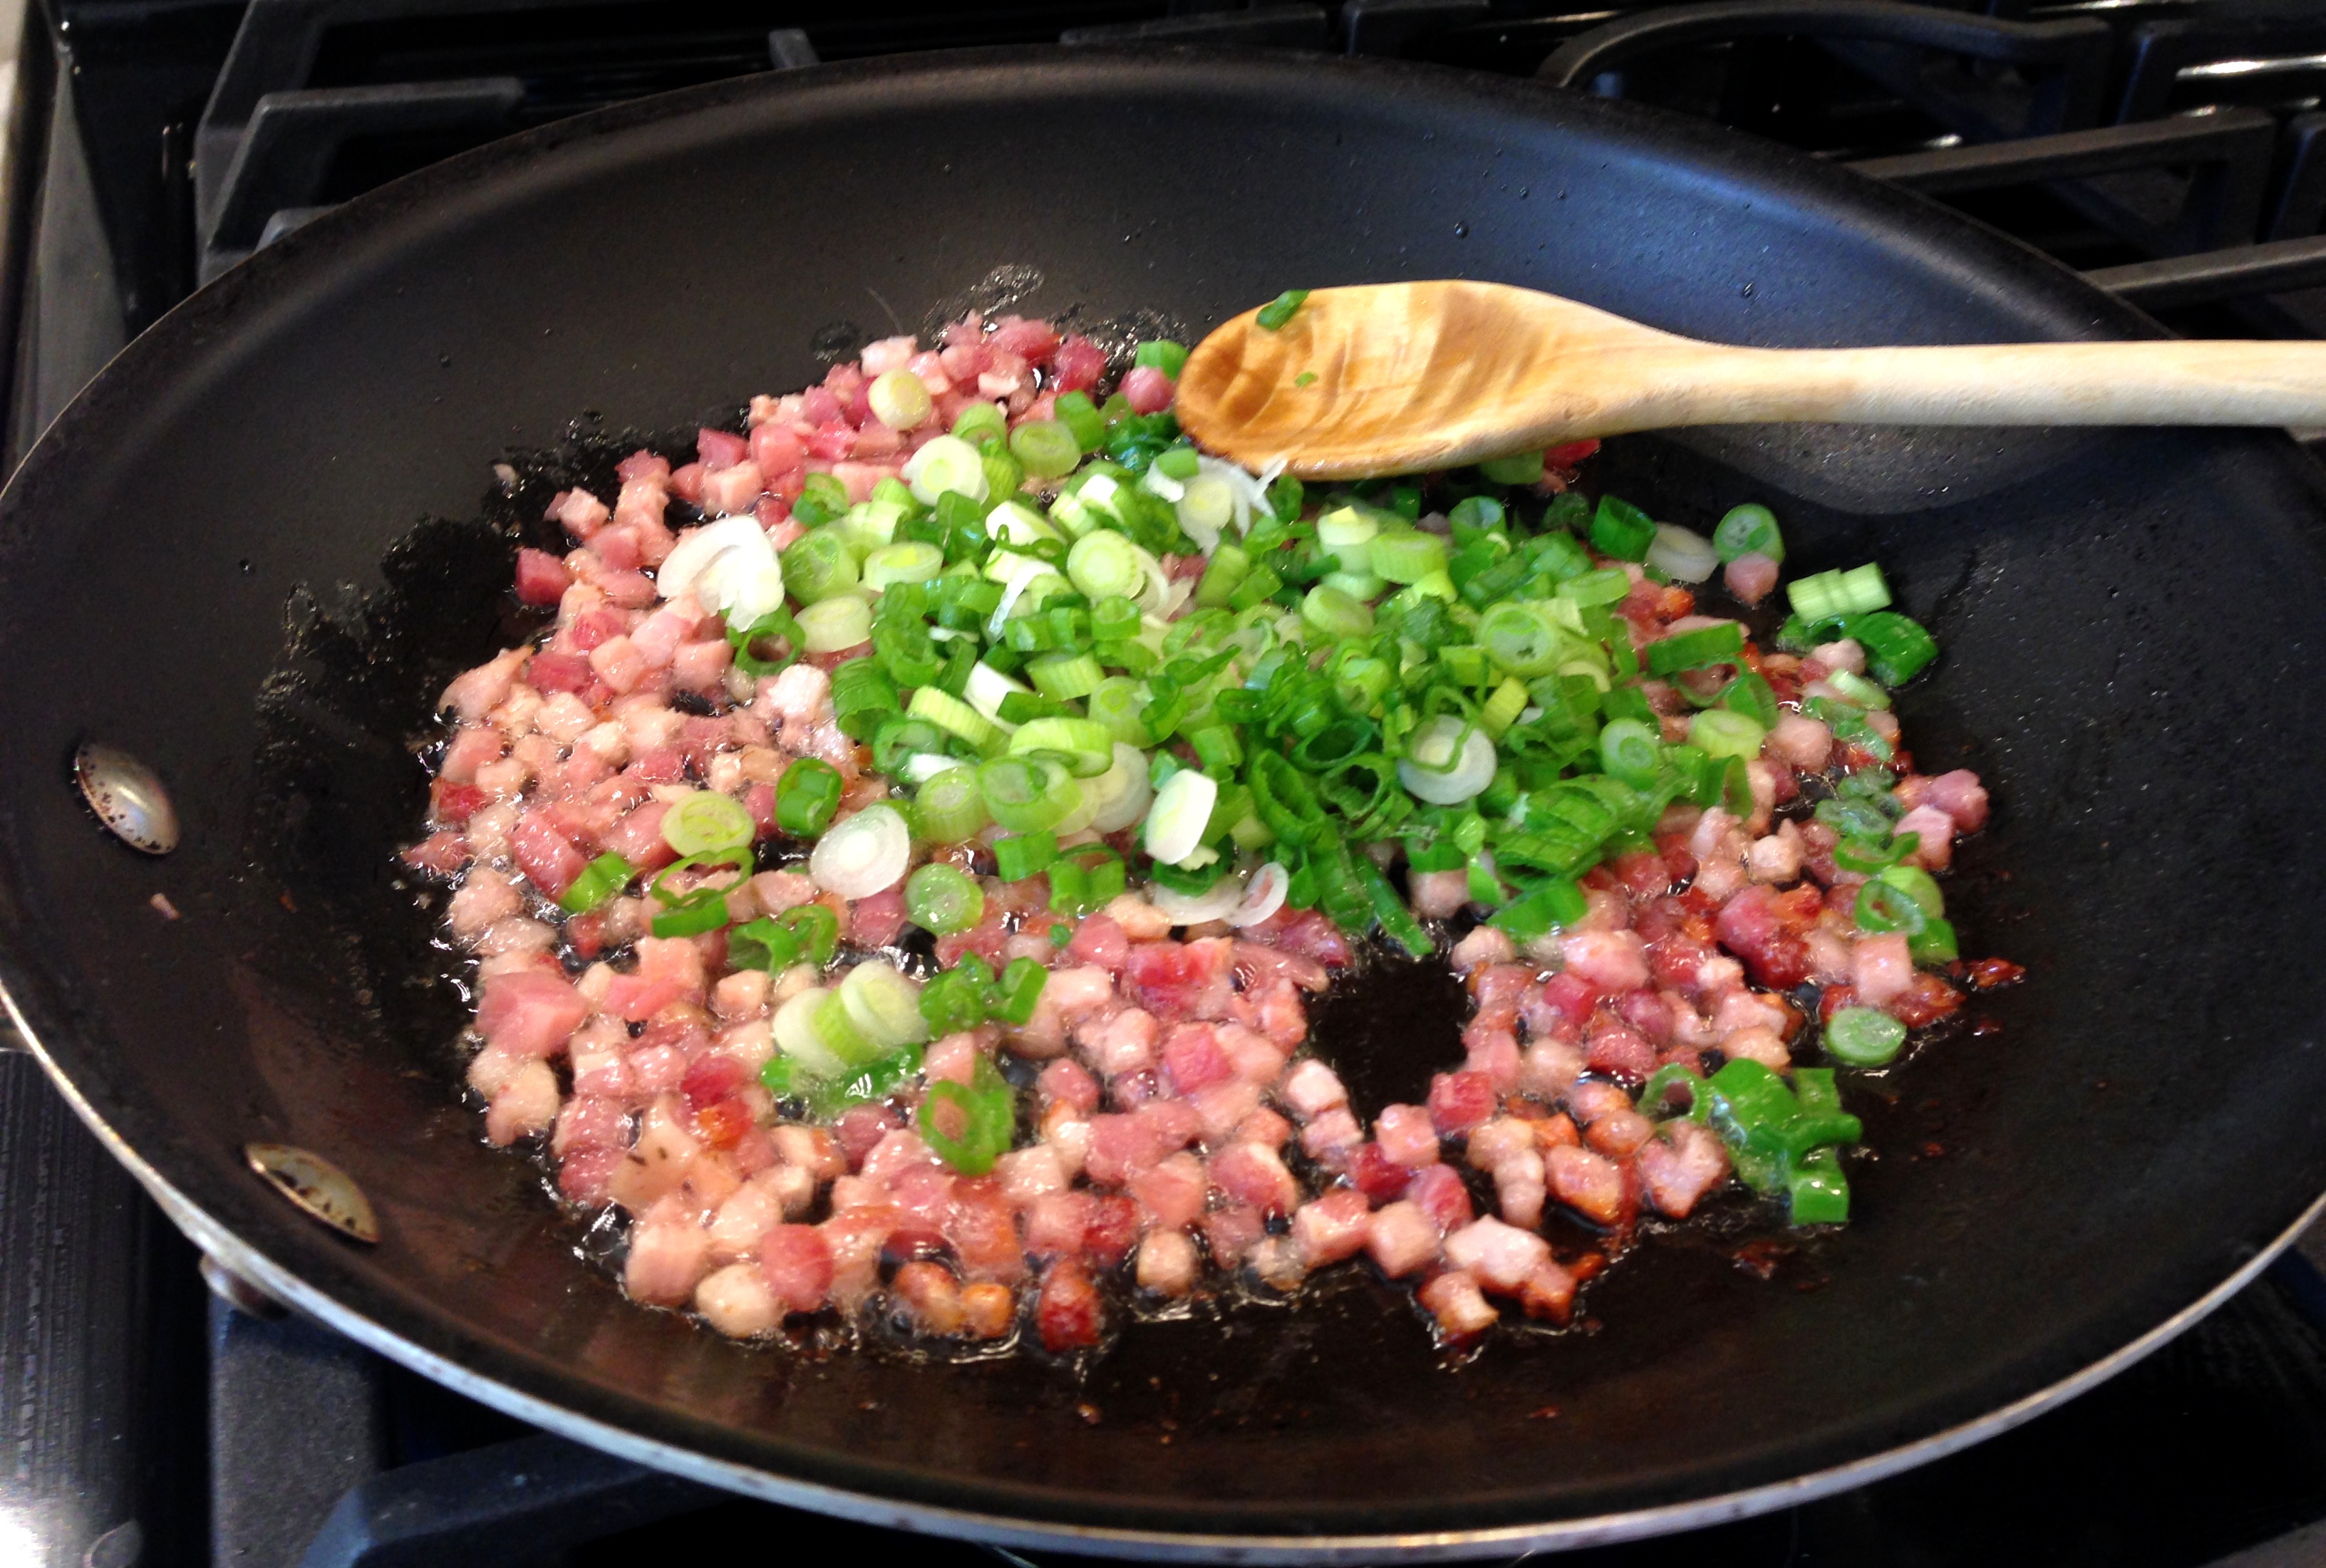 Pancetta and Green Onions